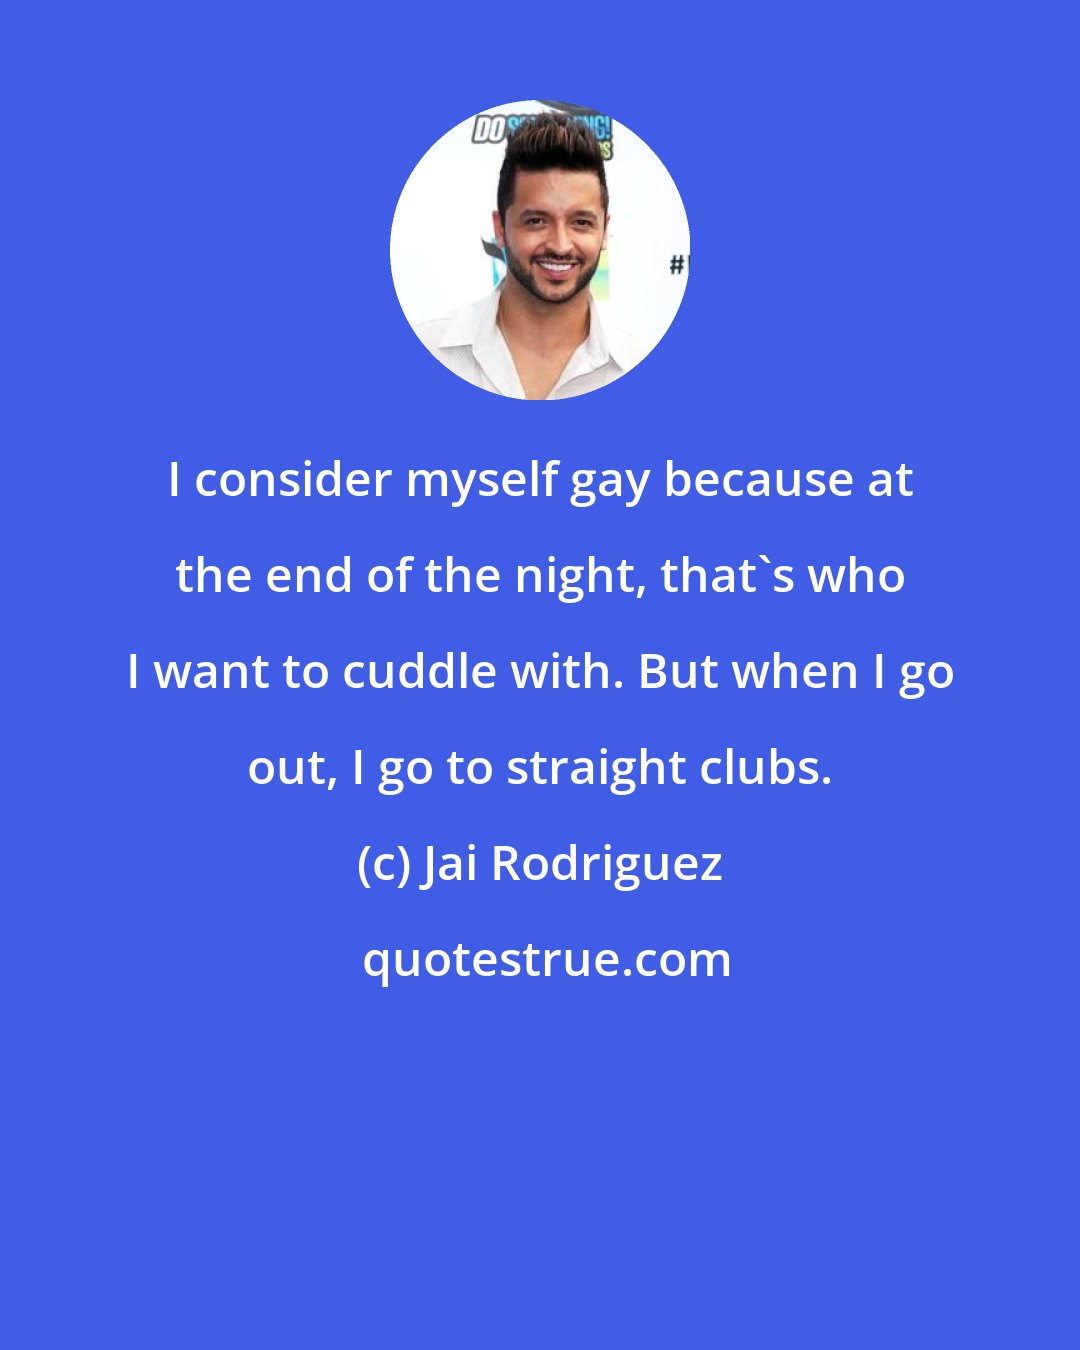 Jai Rodriguez: I consider myself gay because at the end of the night, that's who I want to cuddle with. But when I go out, I go to straight clubs.